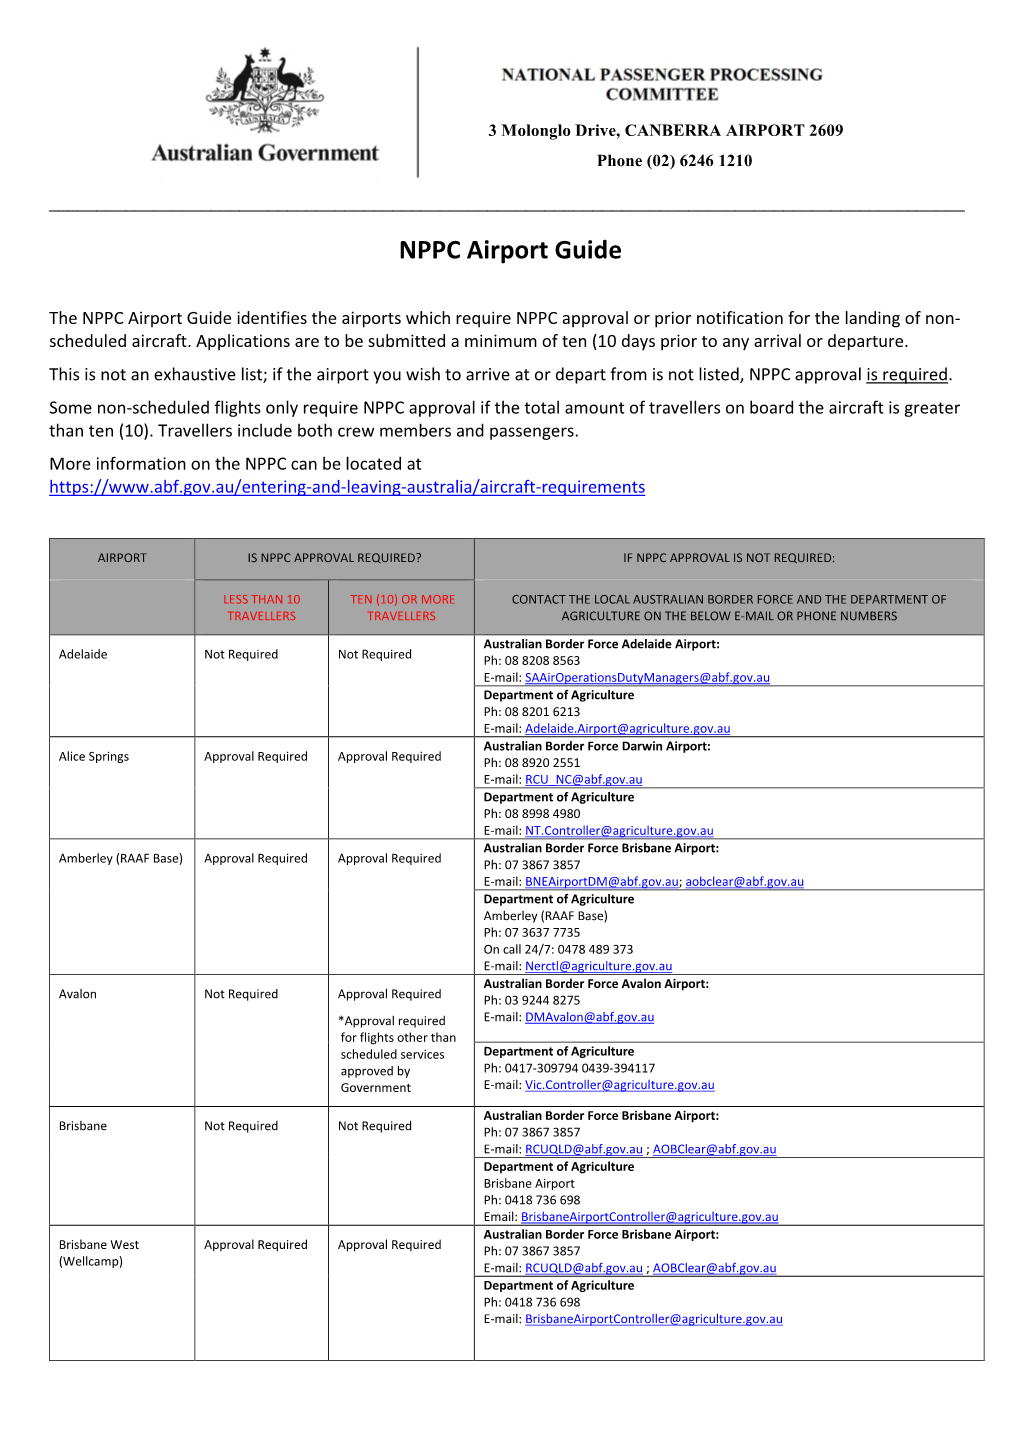 NPPC Airport Guide